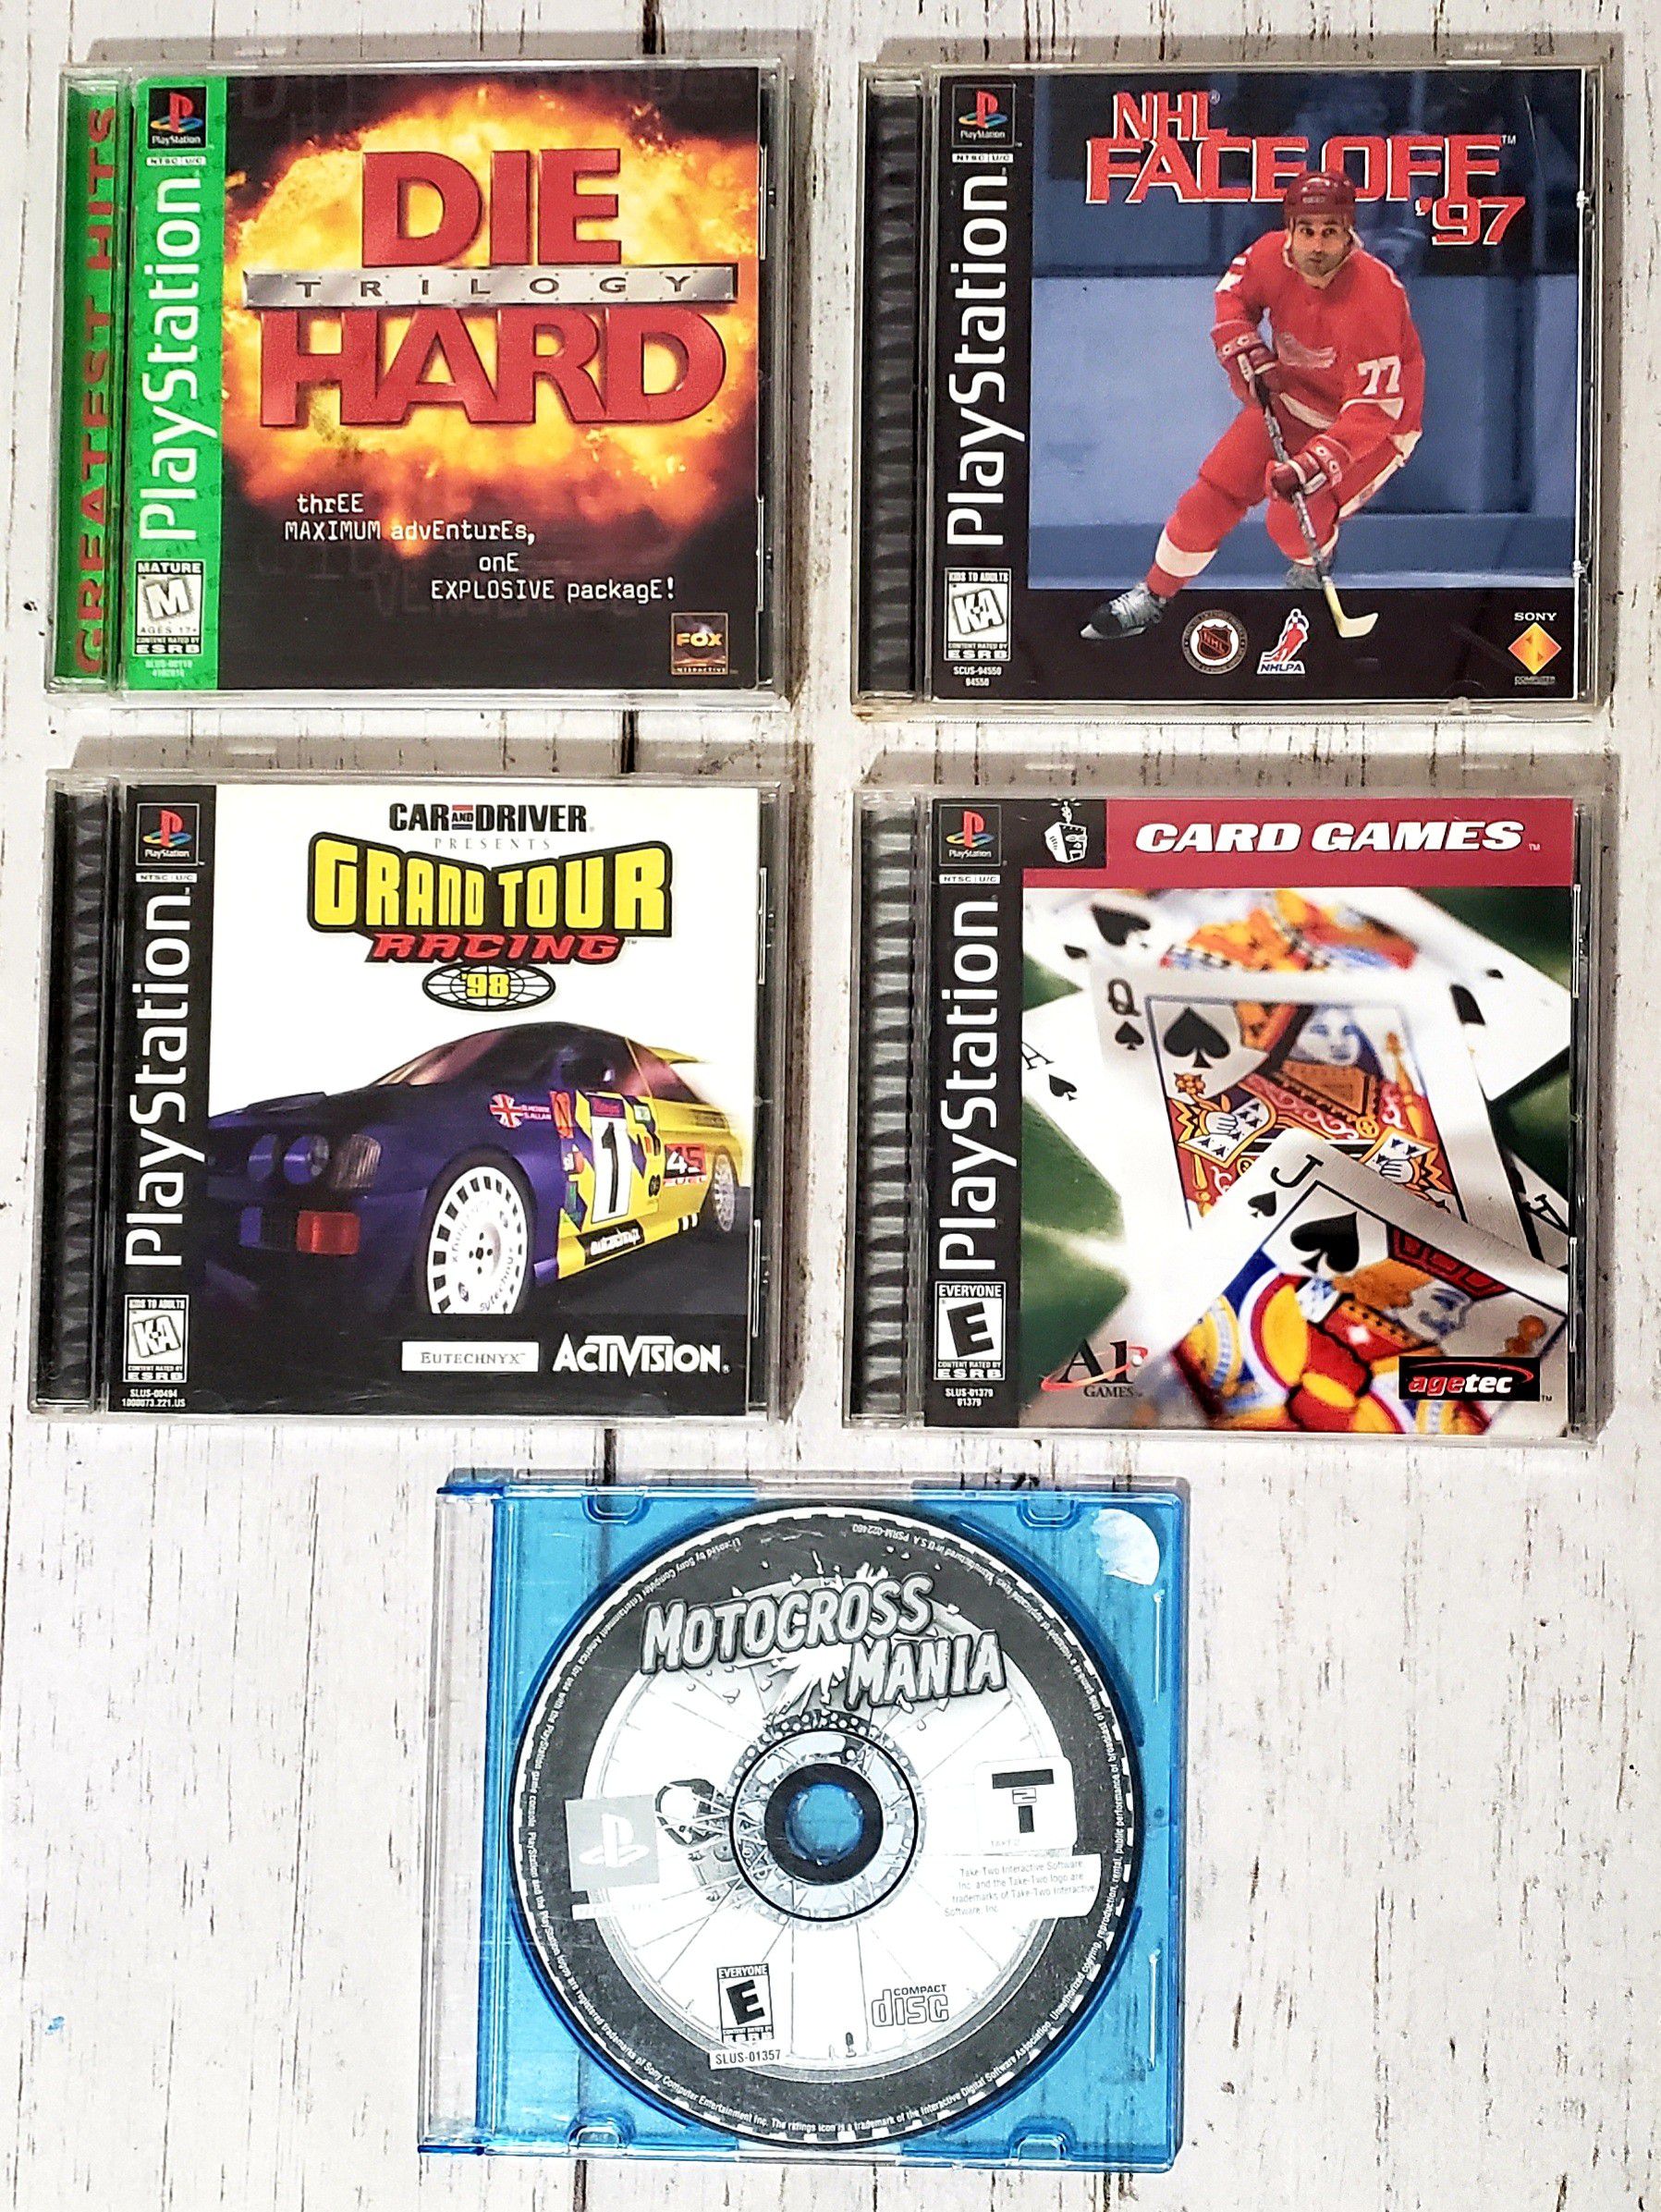 Lot of 5 PS1 Games Sony PlayStation All Complete TESTED - Die Hard Trilogy etc..